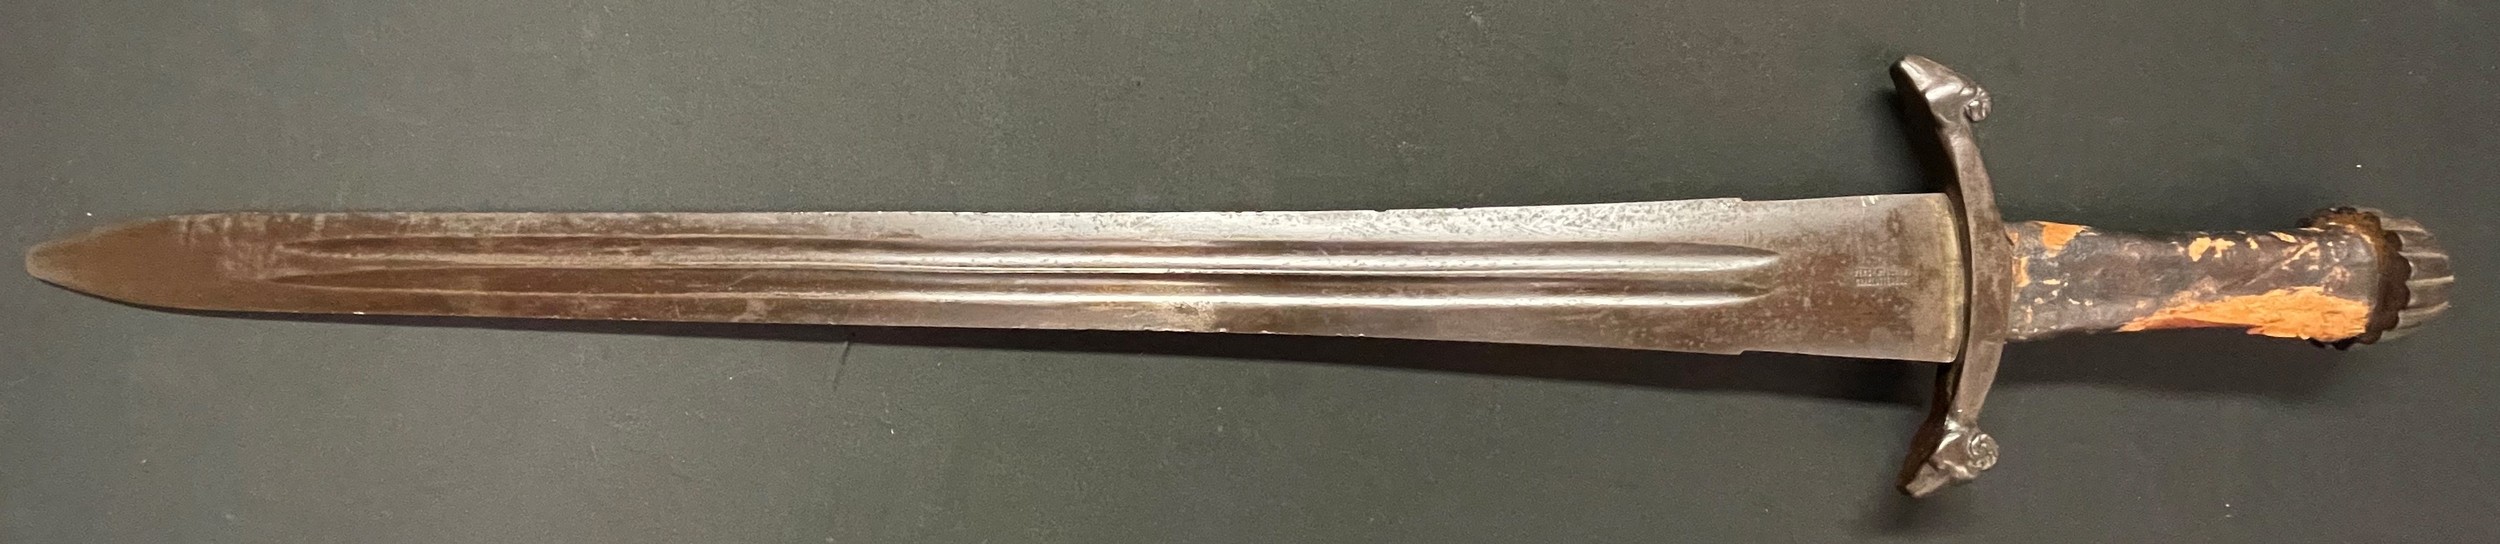 Sword by the German theatrical costume makers "Verch & Flothow, Charlottenburg" with double edged - Image 2 of 13